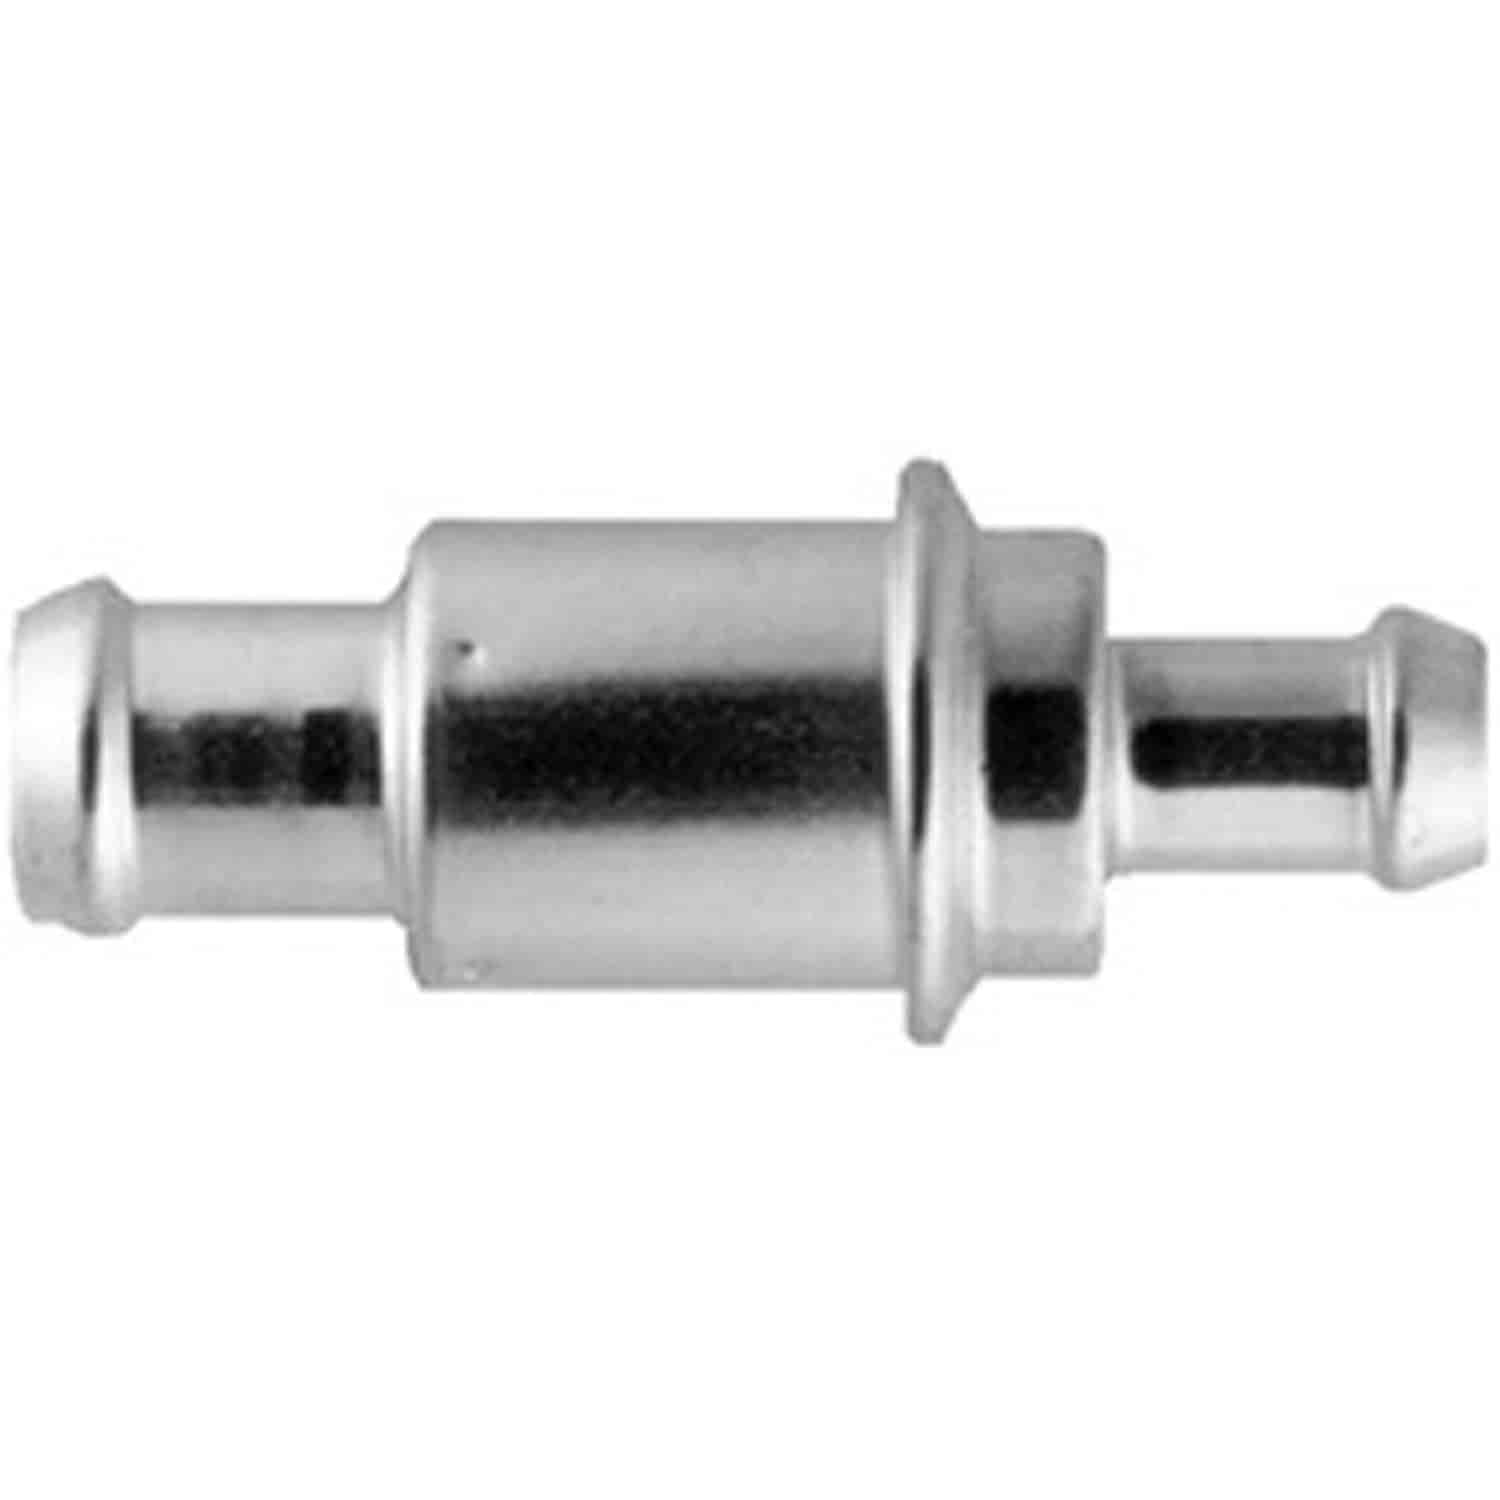 This PCV valve from Omix-ADA fits 66-71 Jeep